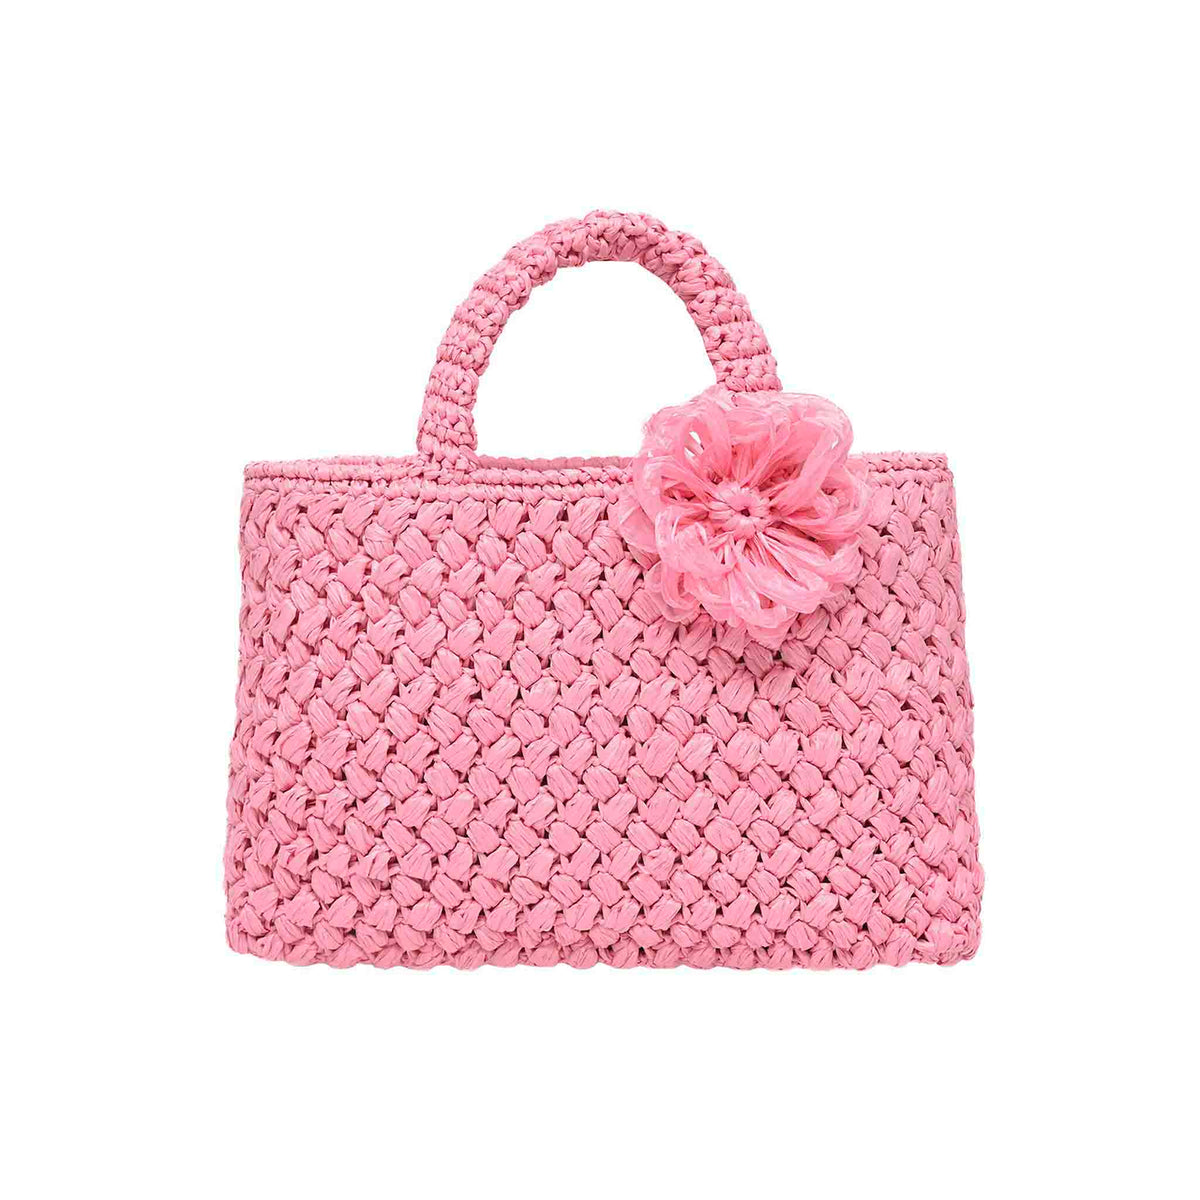 Baby pink Positano Raffia tote Bag enhancing beach and shopping experiences,  Italia collection from Carmen Sol